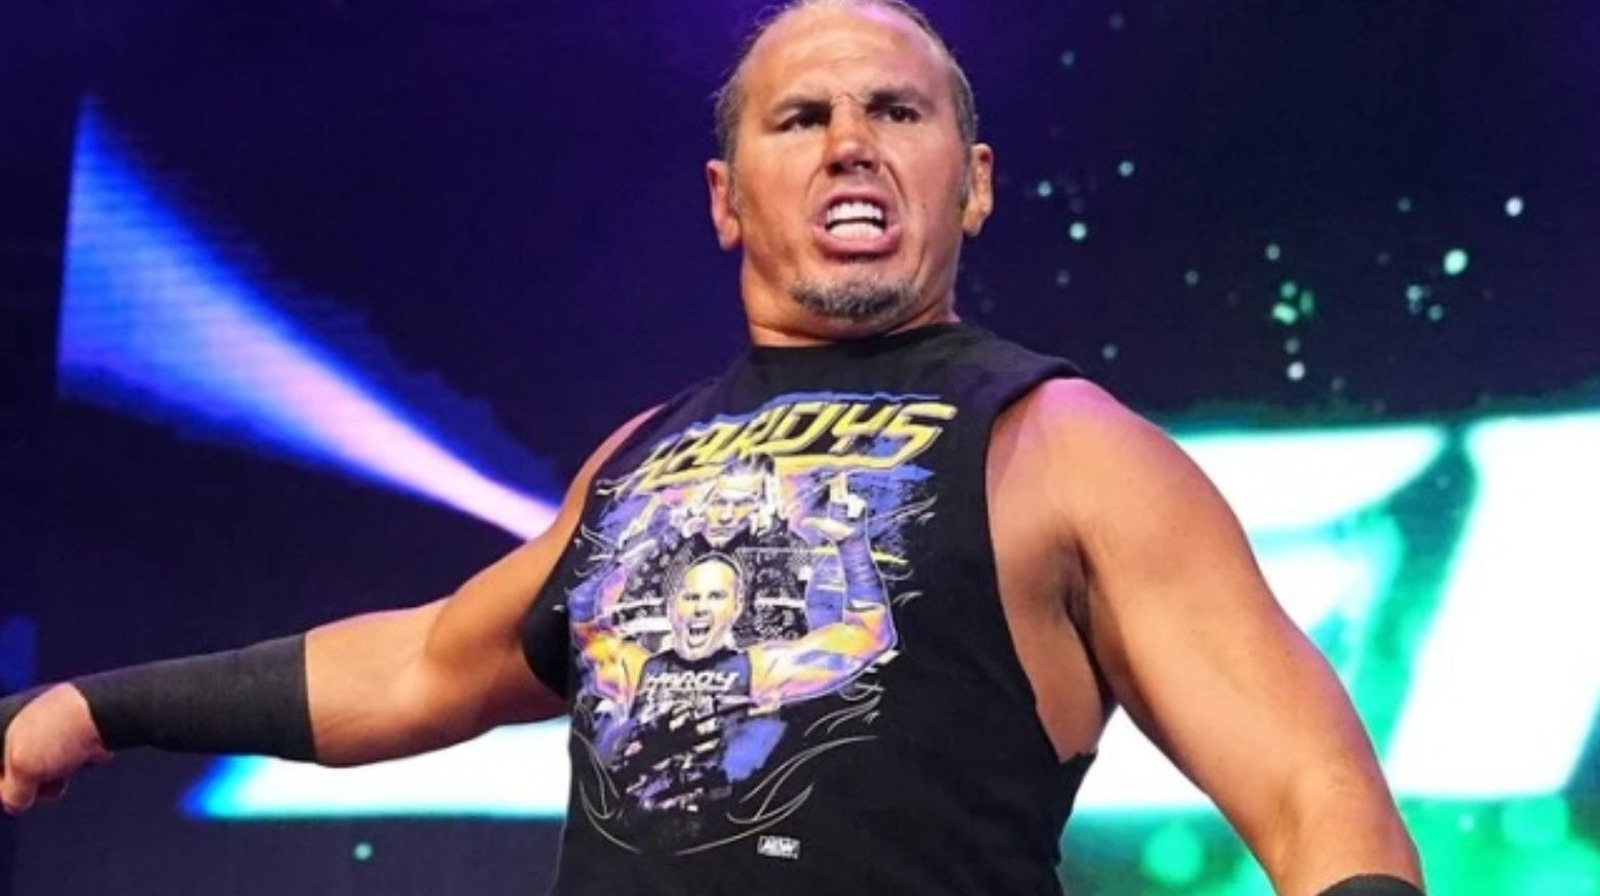 Matt Hardy Comments On Sammy Guevara's Suspension, He And Jeff's AEW Contracts